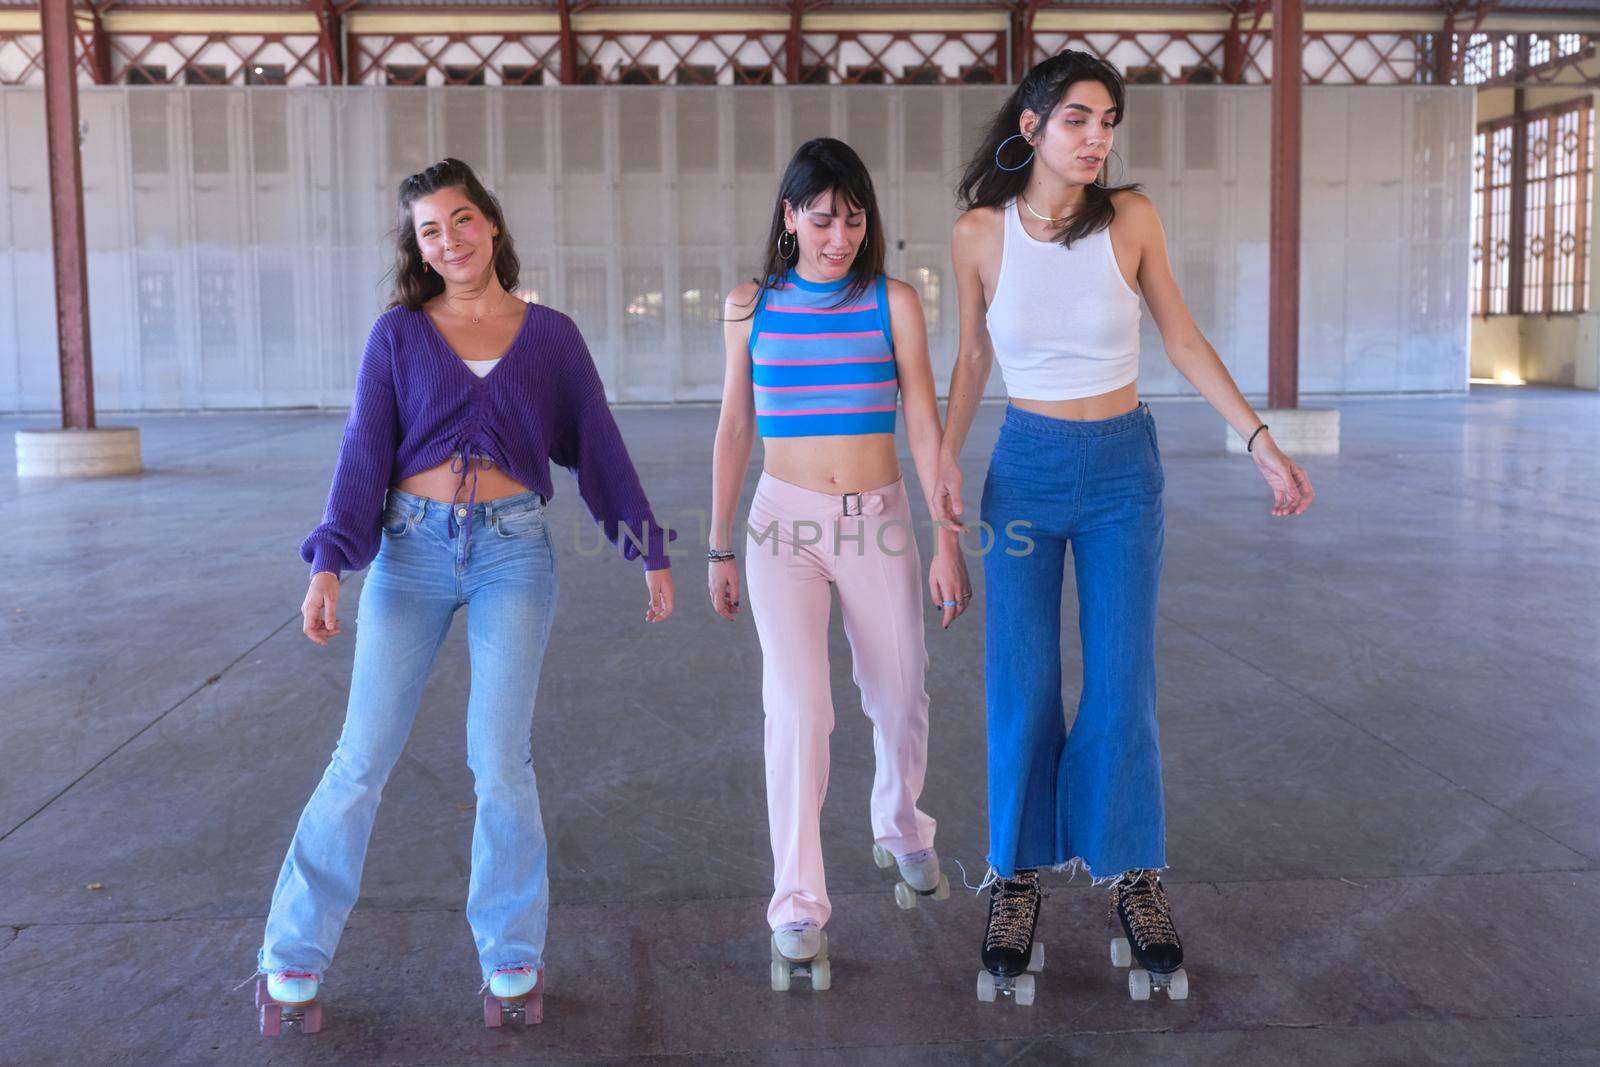 Three teenagers skating wearing vintage clothes and skates in the city by WesternExoticStockers